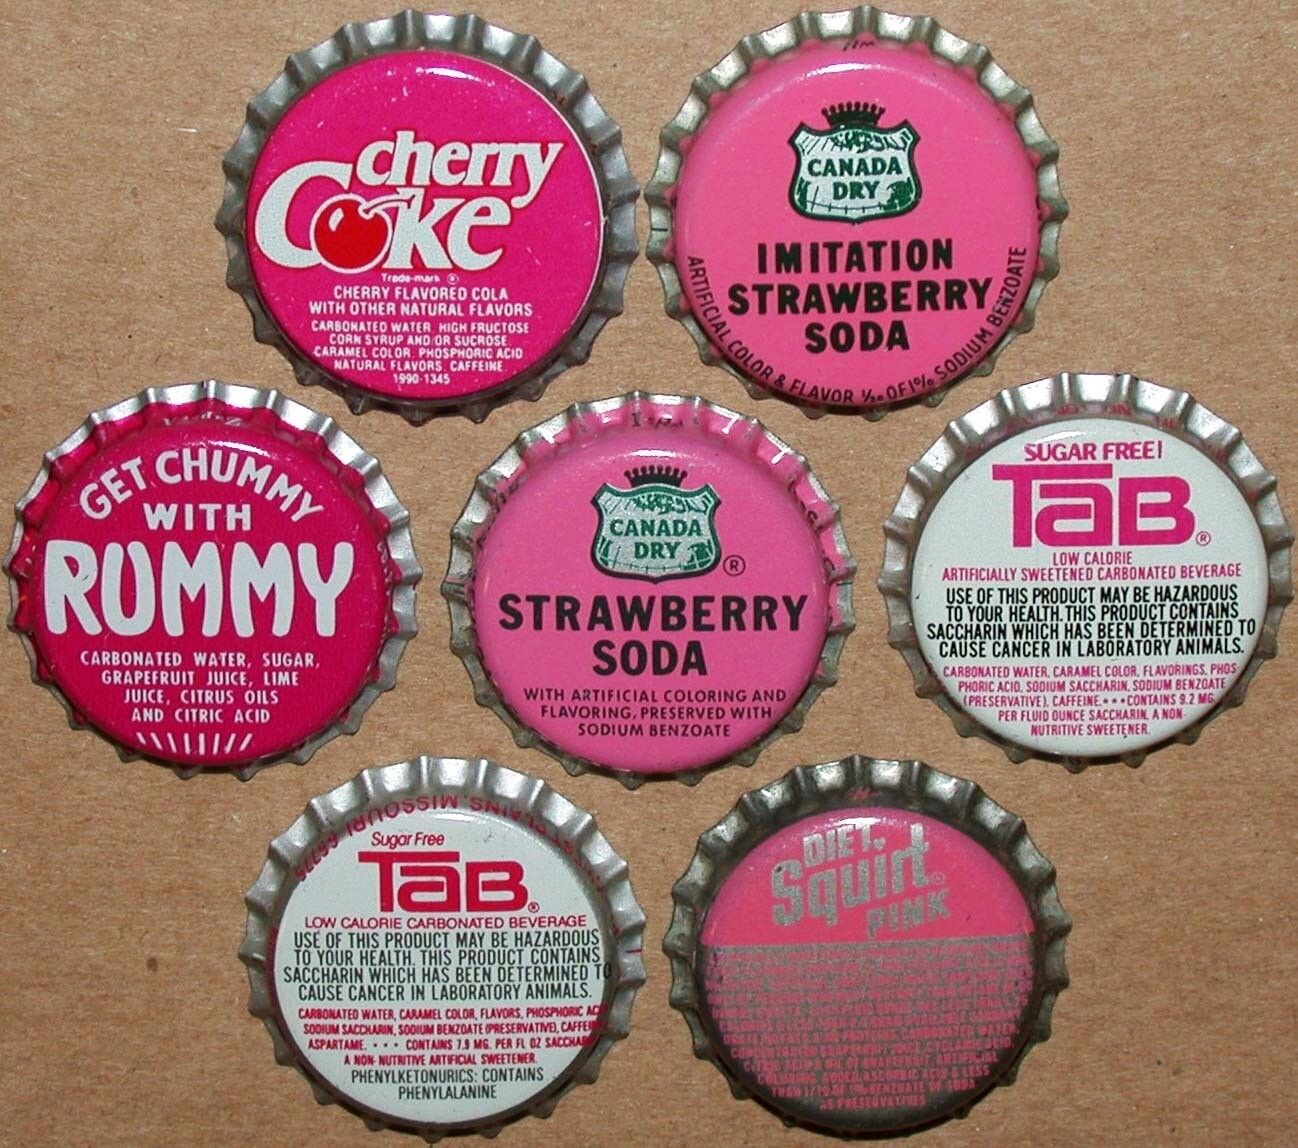 Vintage soda pop bottle caps PINK COLORS Lot of 7 different unused new old stock